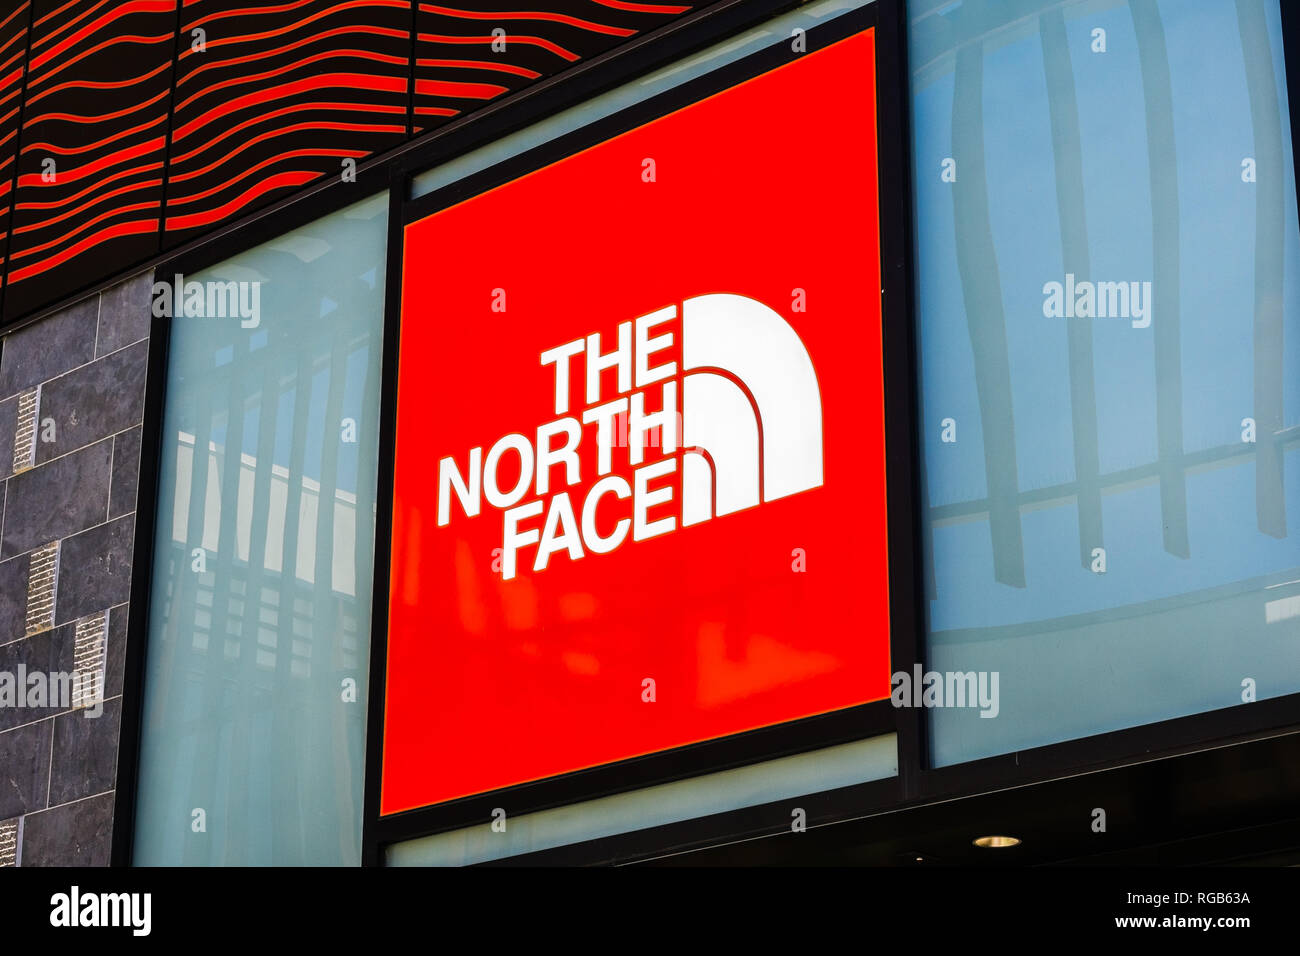 August 2, 2018 Palo Alto / CA / USA - The North Face logo above the entrance to the store located in the upscale open air Stanford Shopping Mall, Sili Stock Photo